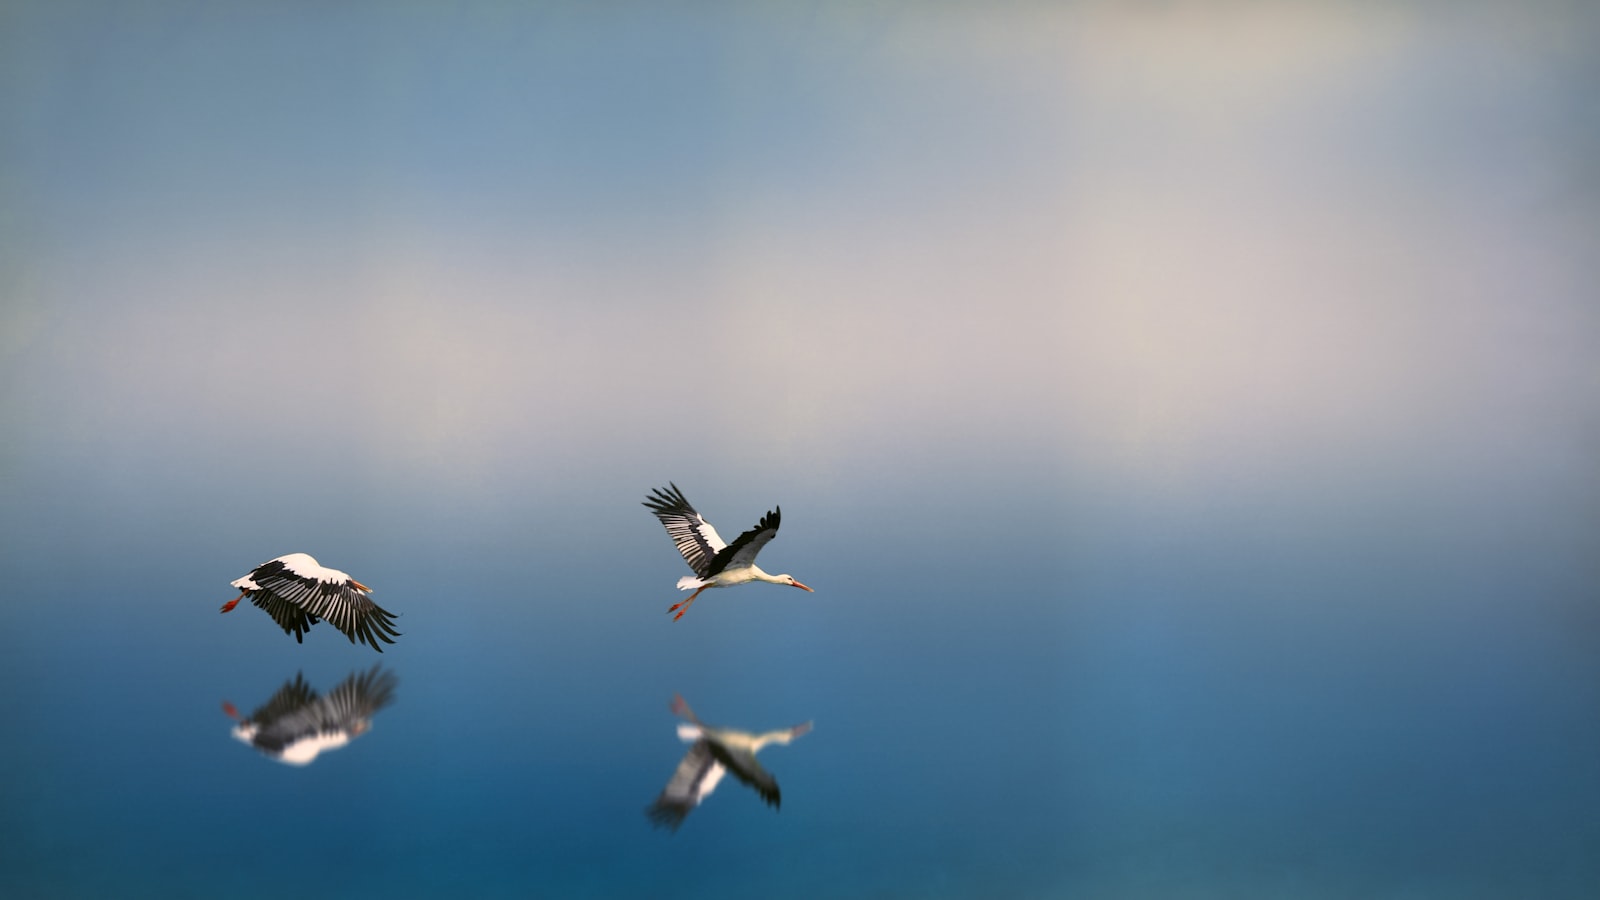 Sony a7 + Tamron 18-270mm F3.5-6.3 Di II PZD sample photo. Two white-and-black birds flying photography